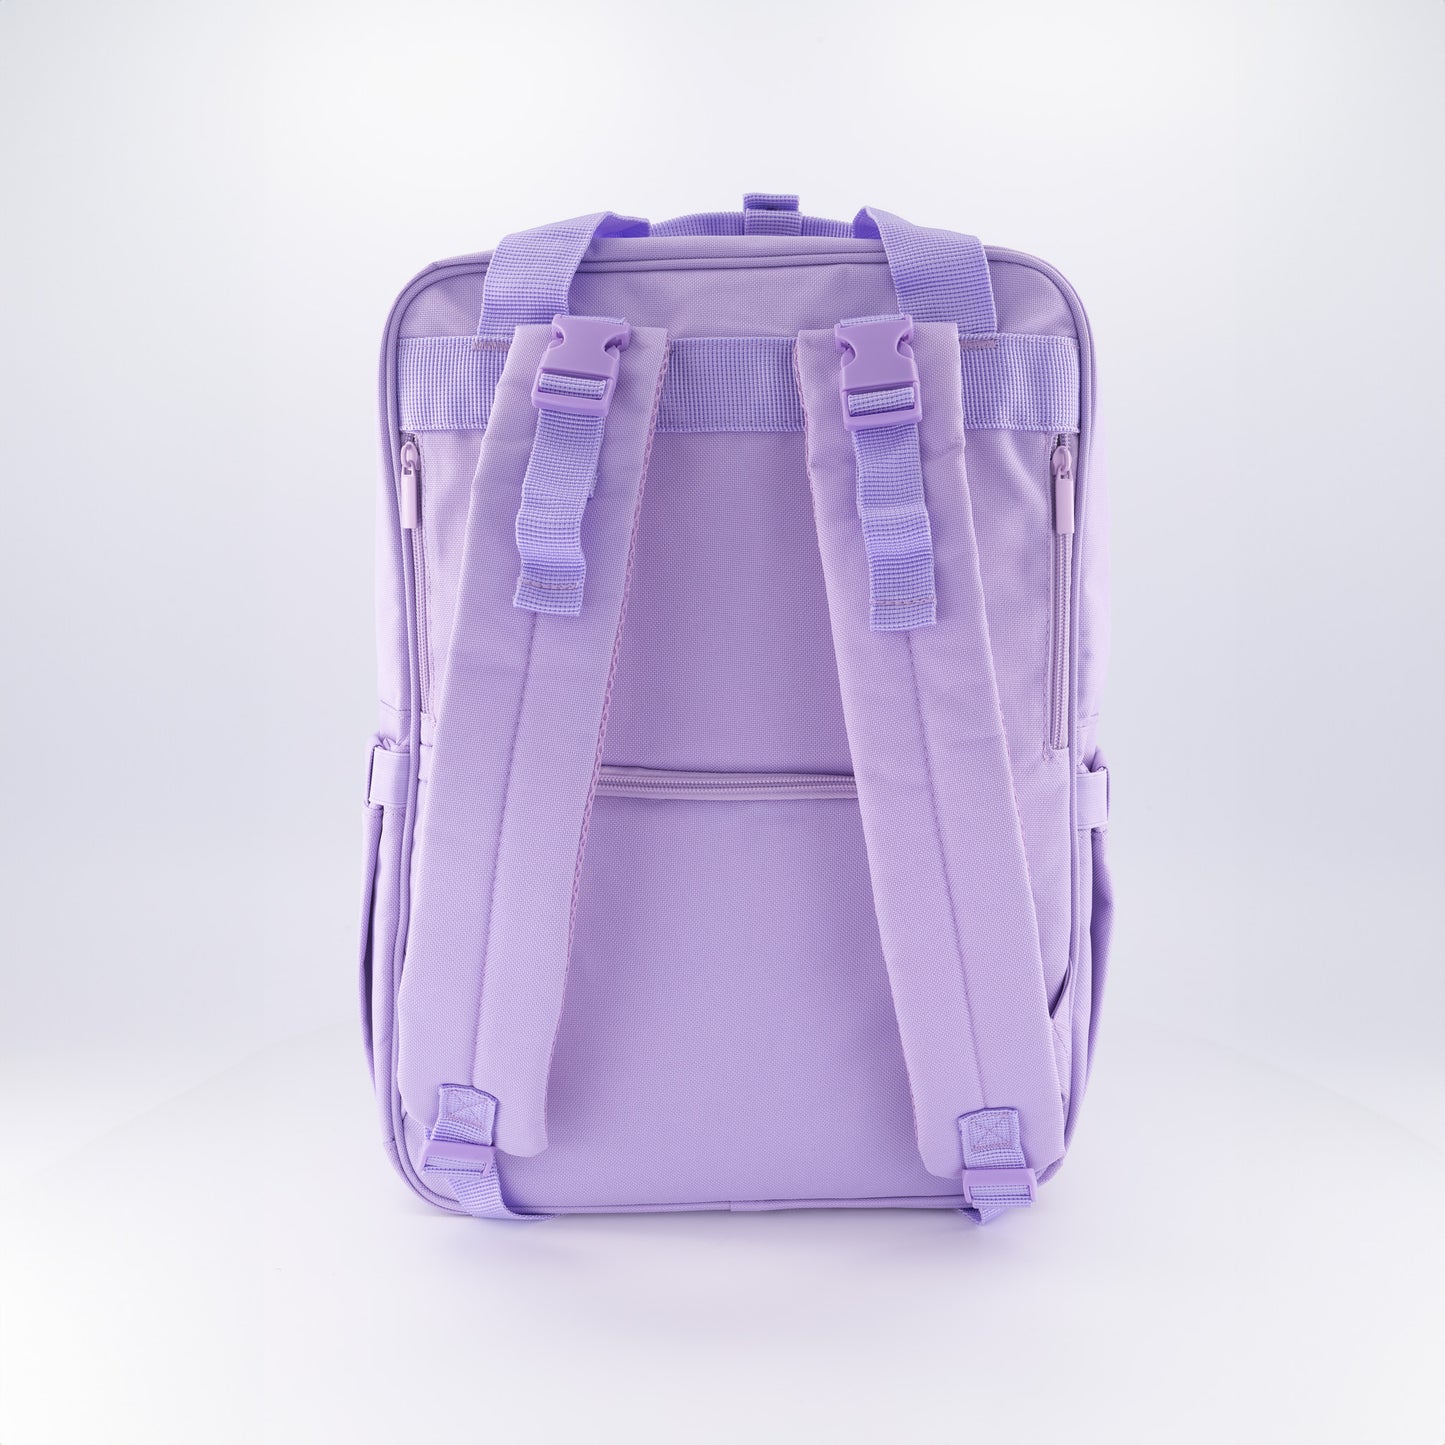 The Camy Nappy Backpack (Lavender)